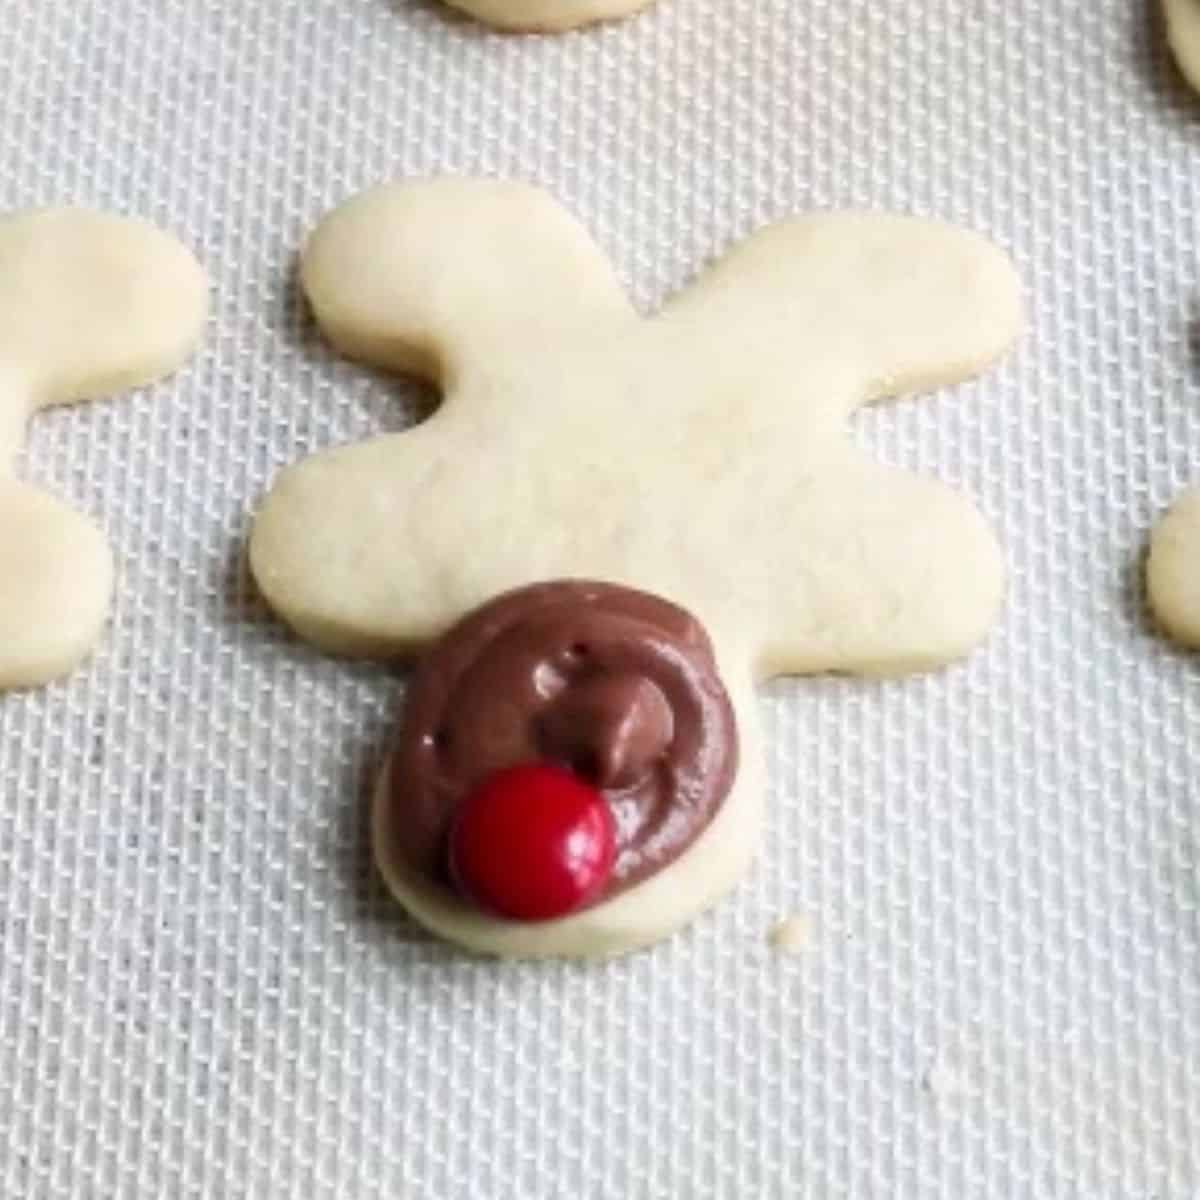 Reindeer cookie with red m&m nose on baking mat.